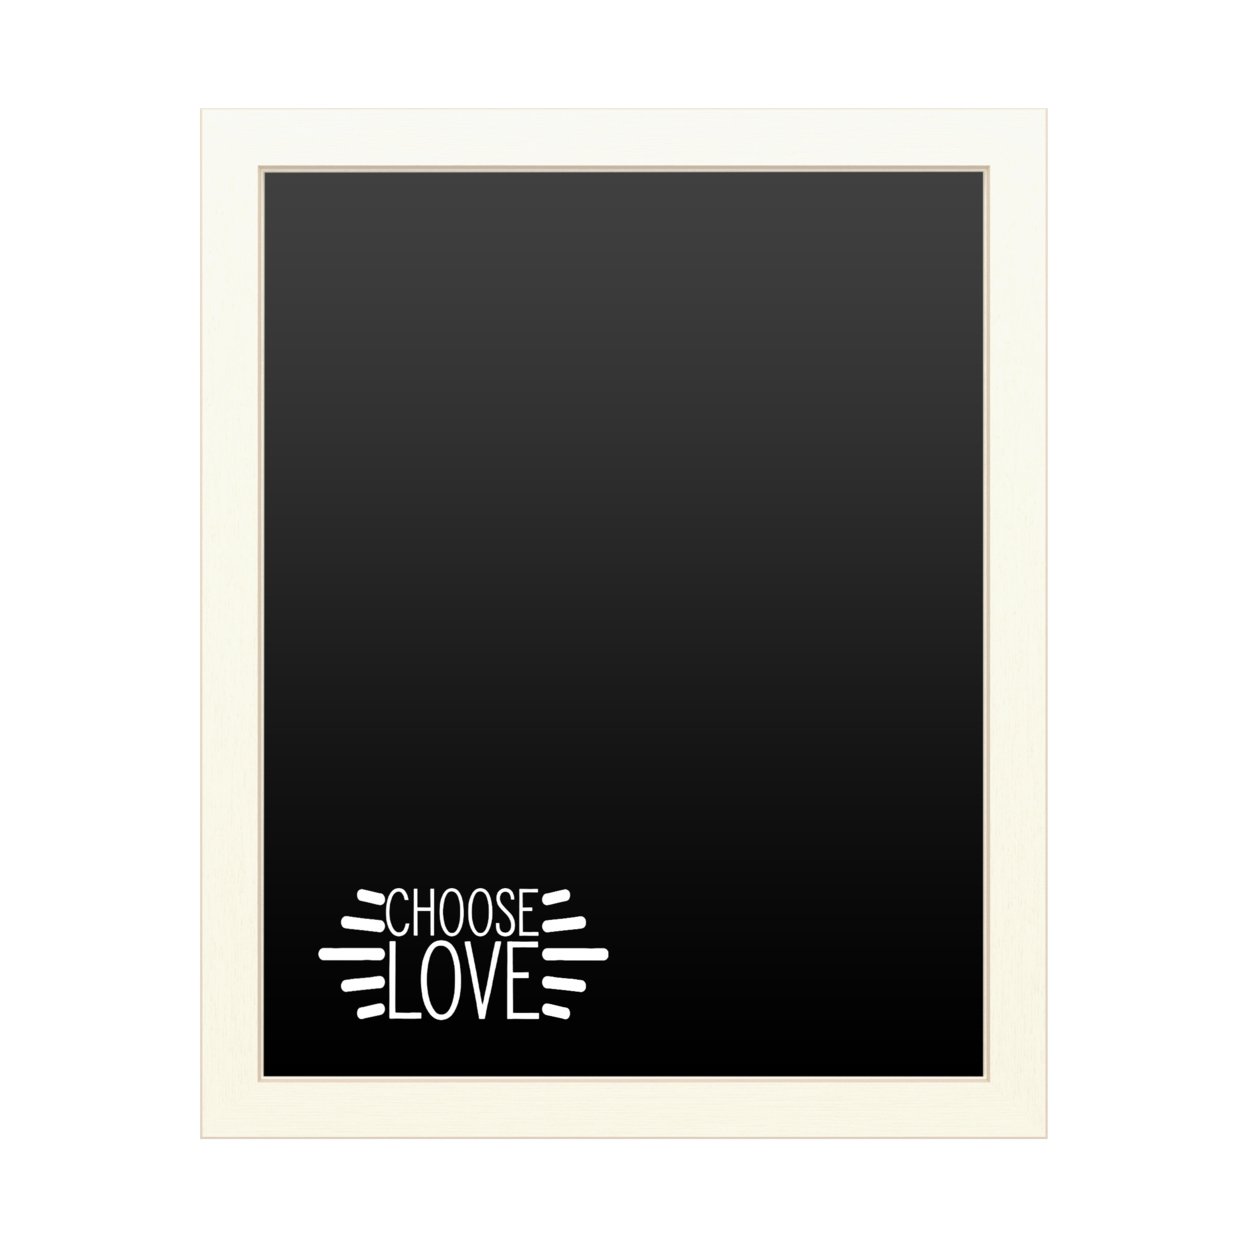 16 X 20 Chalk Board With Printed Artwork - Choose Love White Board - Ready To Hang Chalkboard